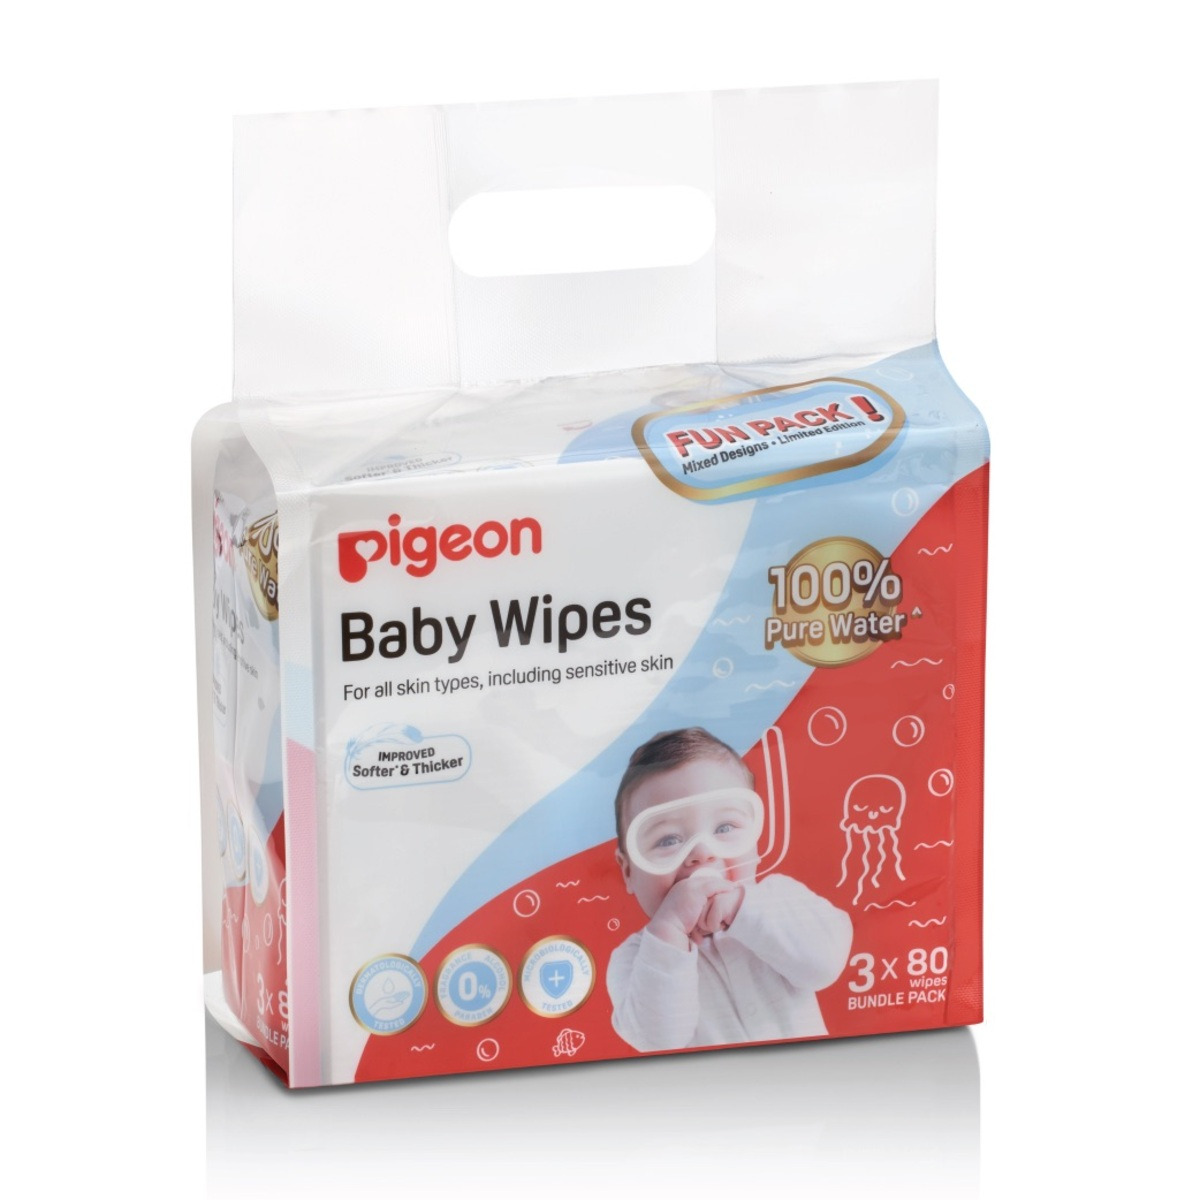 Pigeon 100% Water Baby Wipes